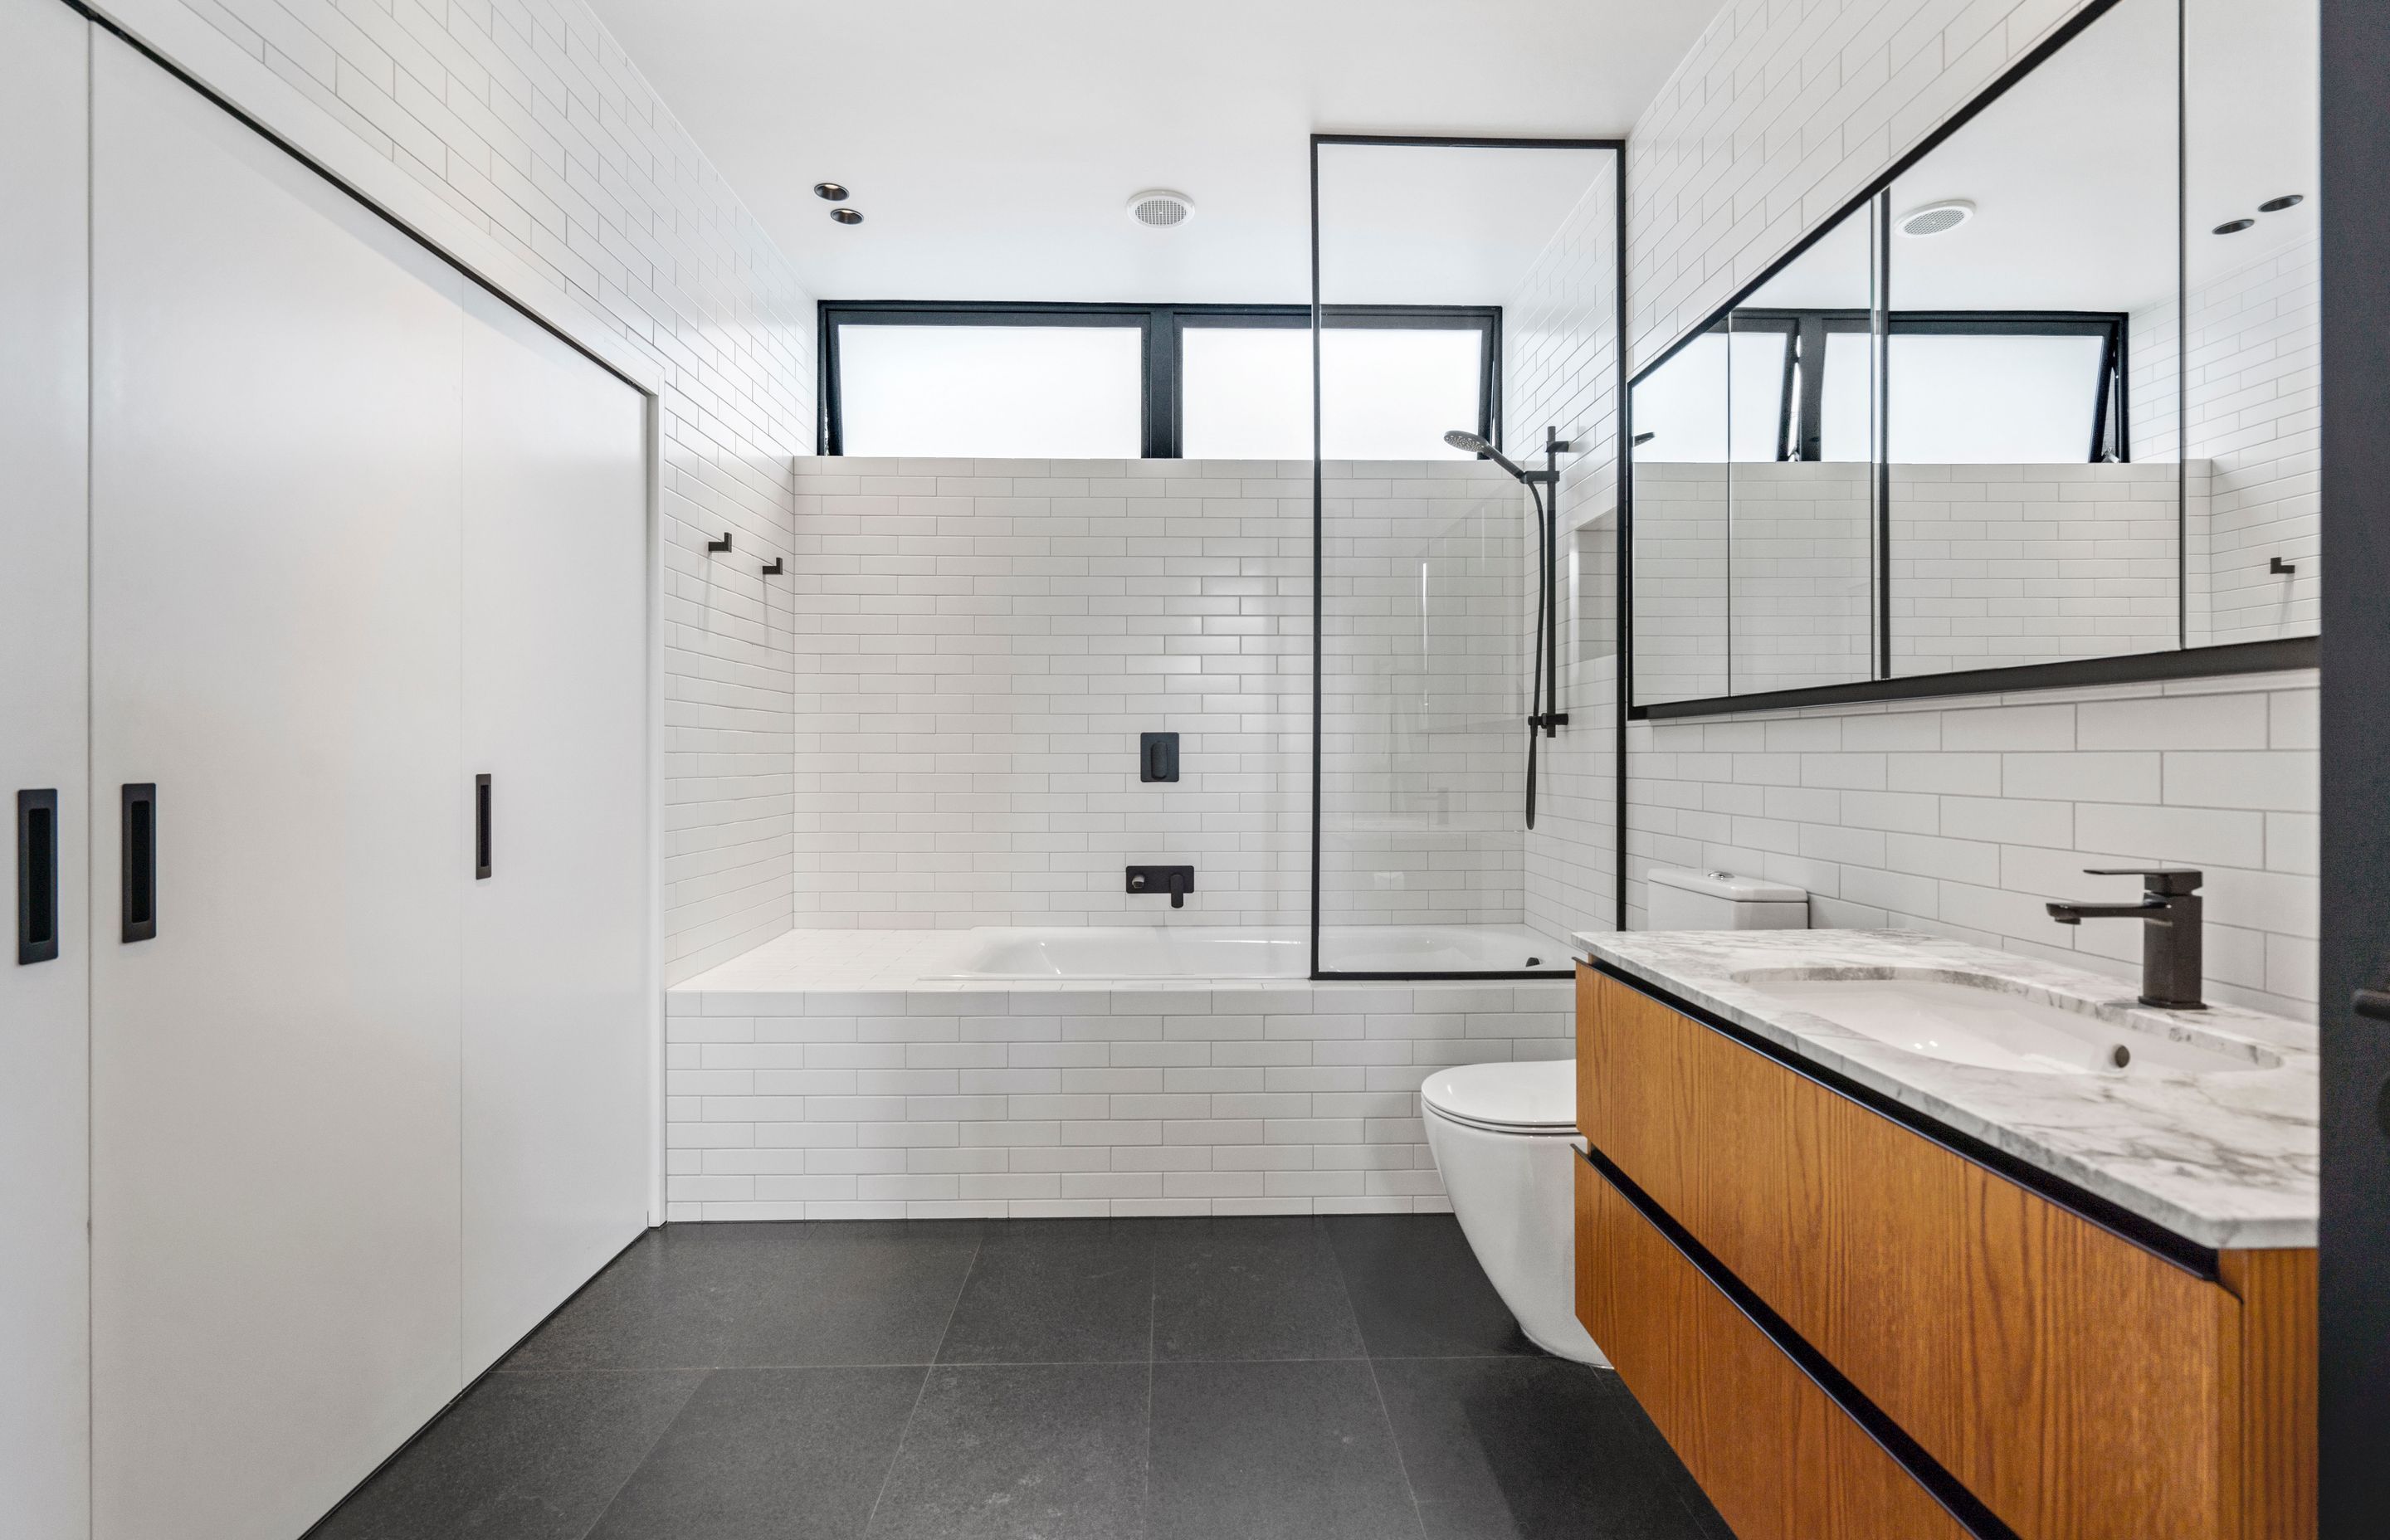 The bathroom has a modern-classic feel with on-trend subway tiling from floor to ceiling, coupled with black tapware and wooden cabinets.